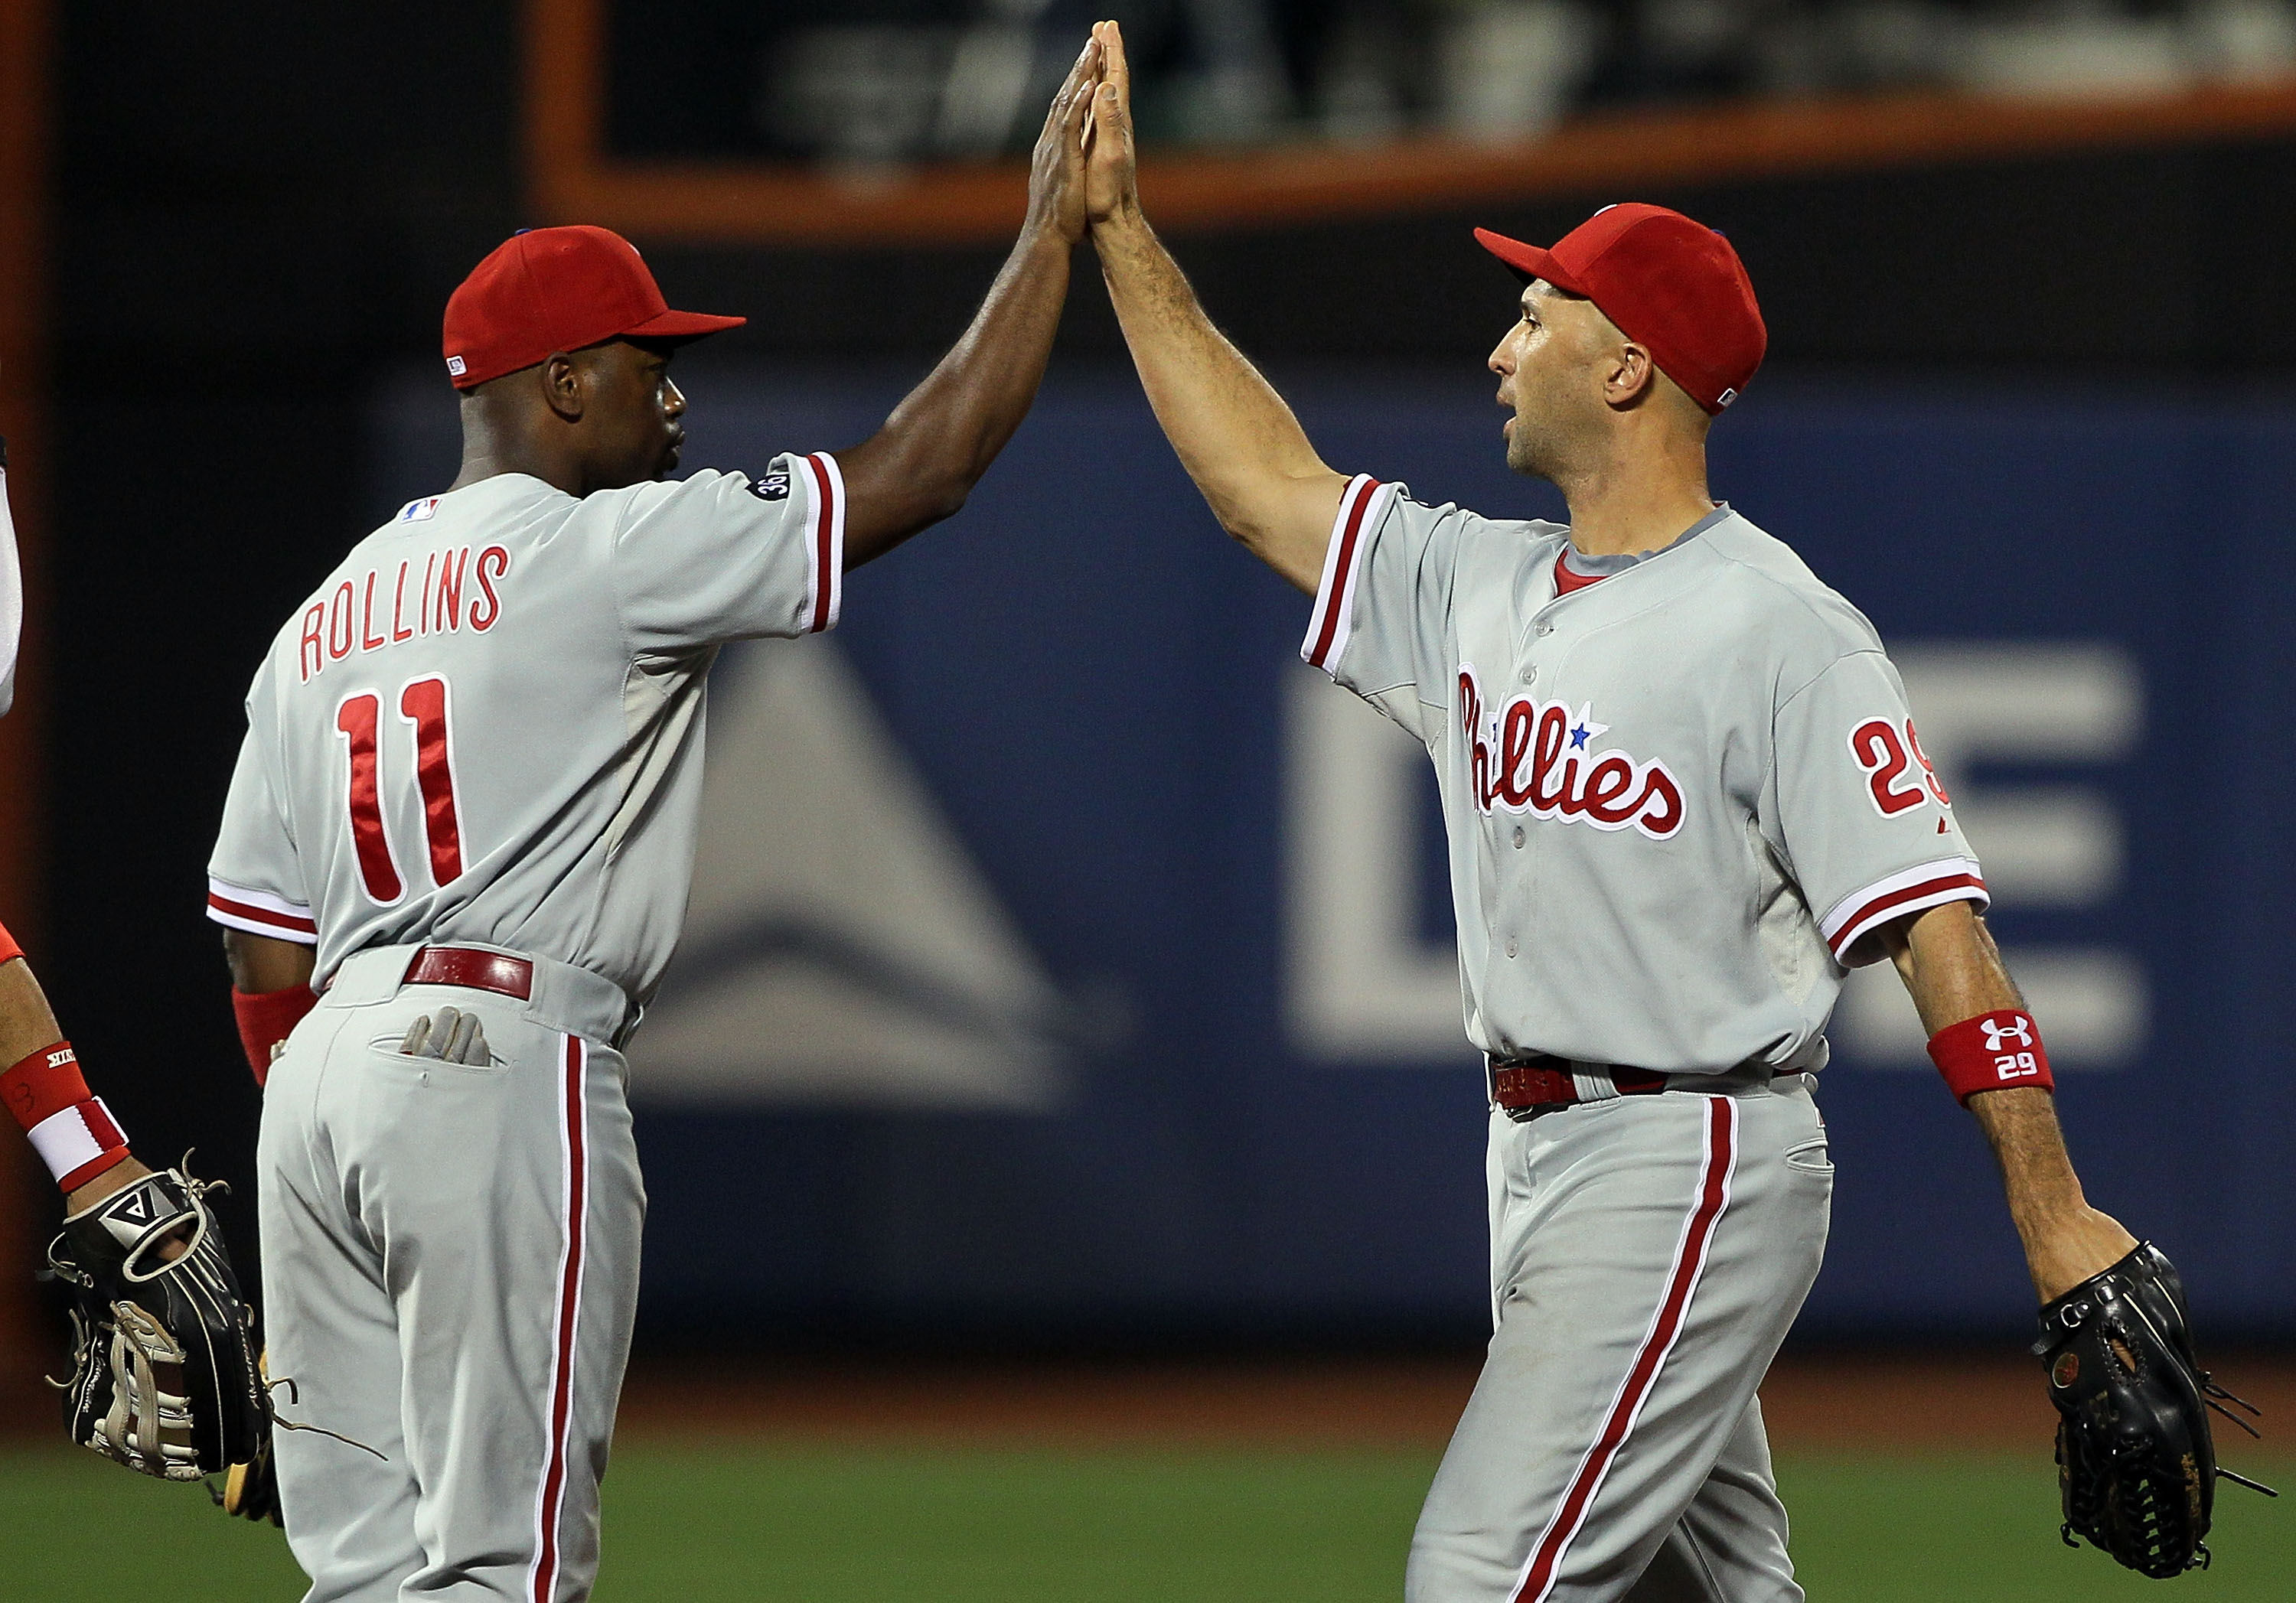 NEW YORK - AUGUST 14:  Jimmy Rollins #11 and Raul Ibanez #29 of the Philadelphia Phillies celebrate after defeating the New York Mets on August 14, 2010 at Citi Field in the Flushing neighborhood of the Queens borough of New York City. The Phillies defeat